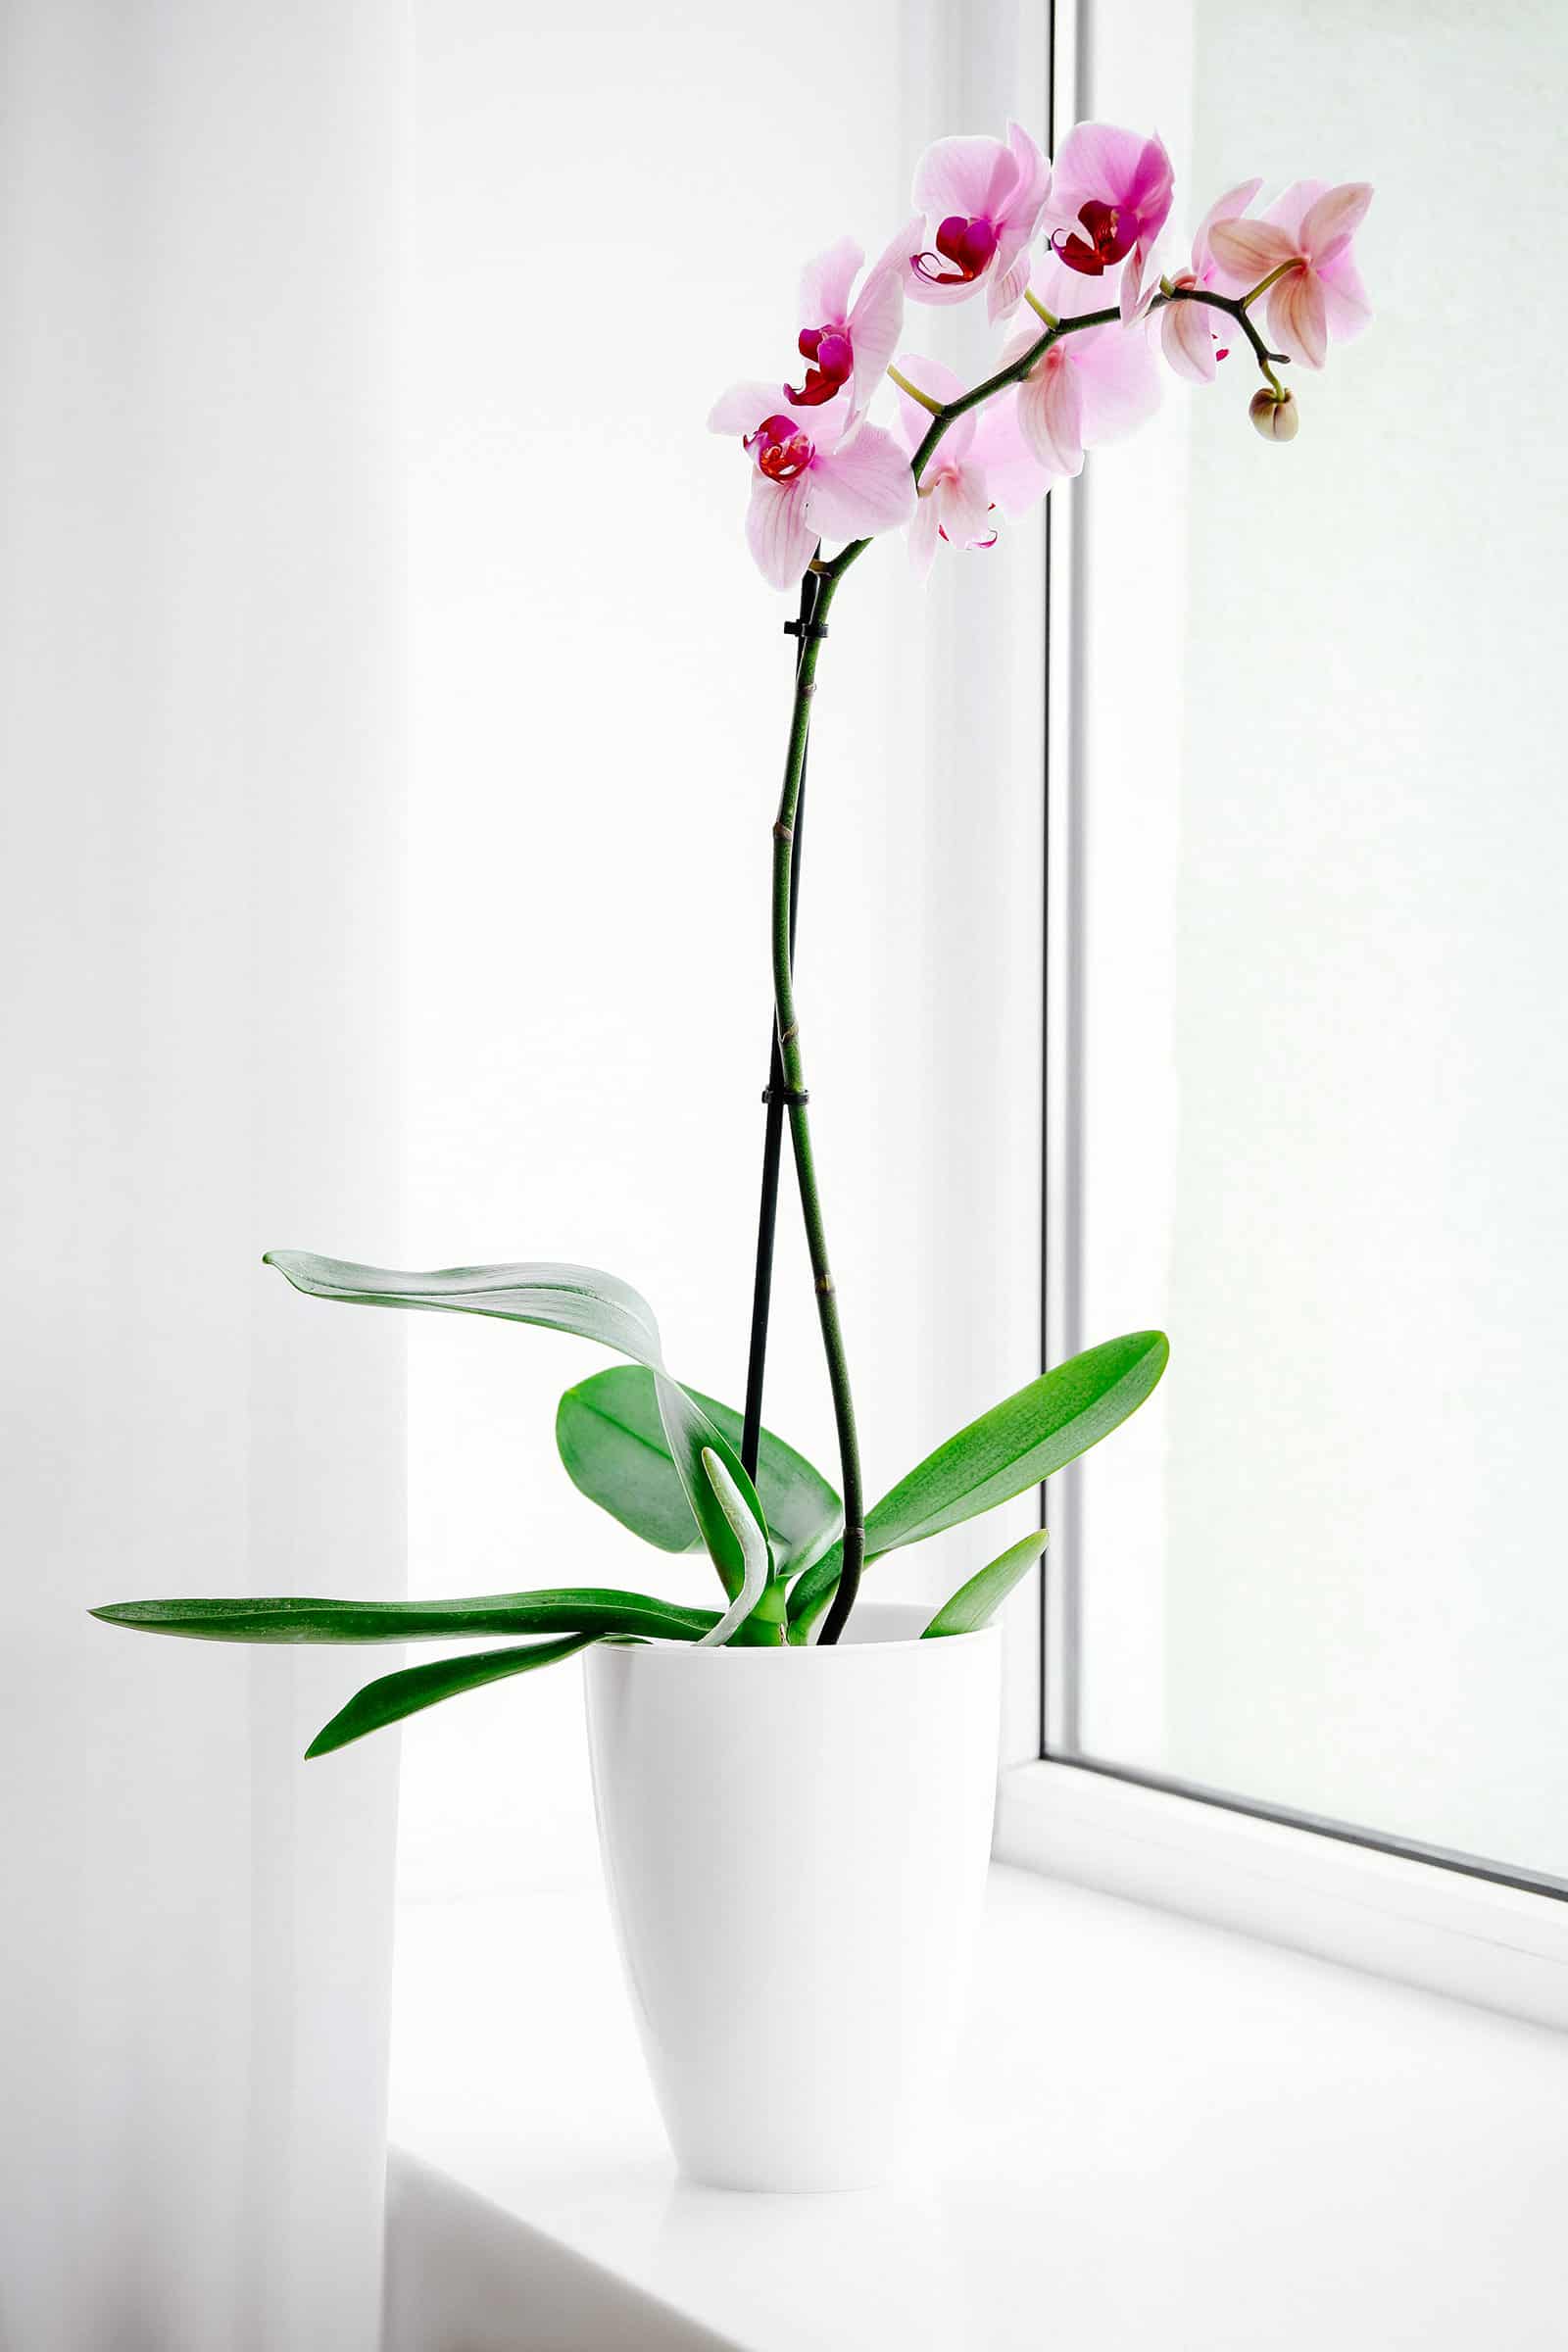 Phalaenopsis orchid in a white pot against a white wall with white curtains in front of a window